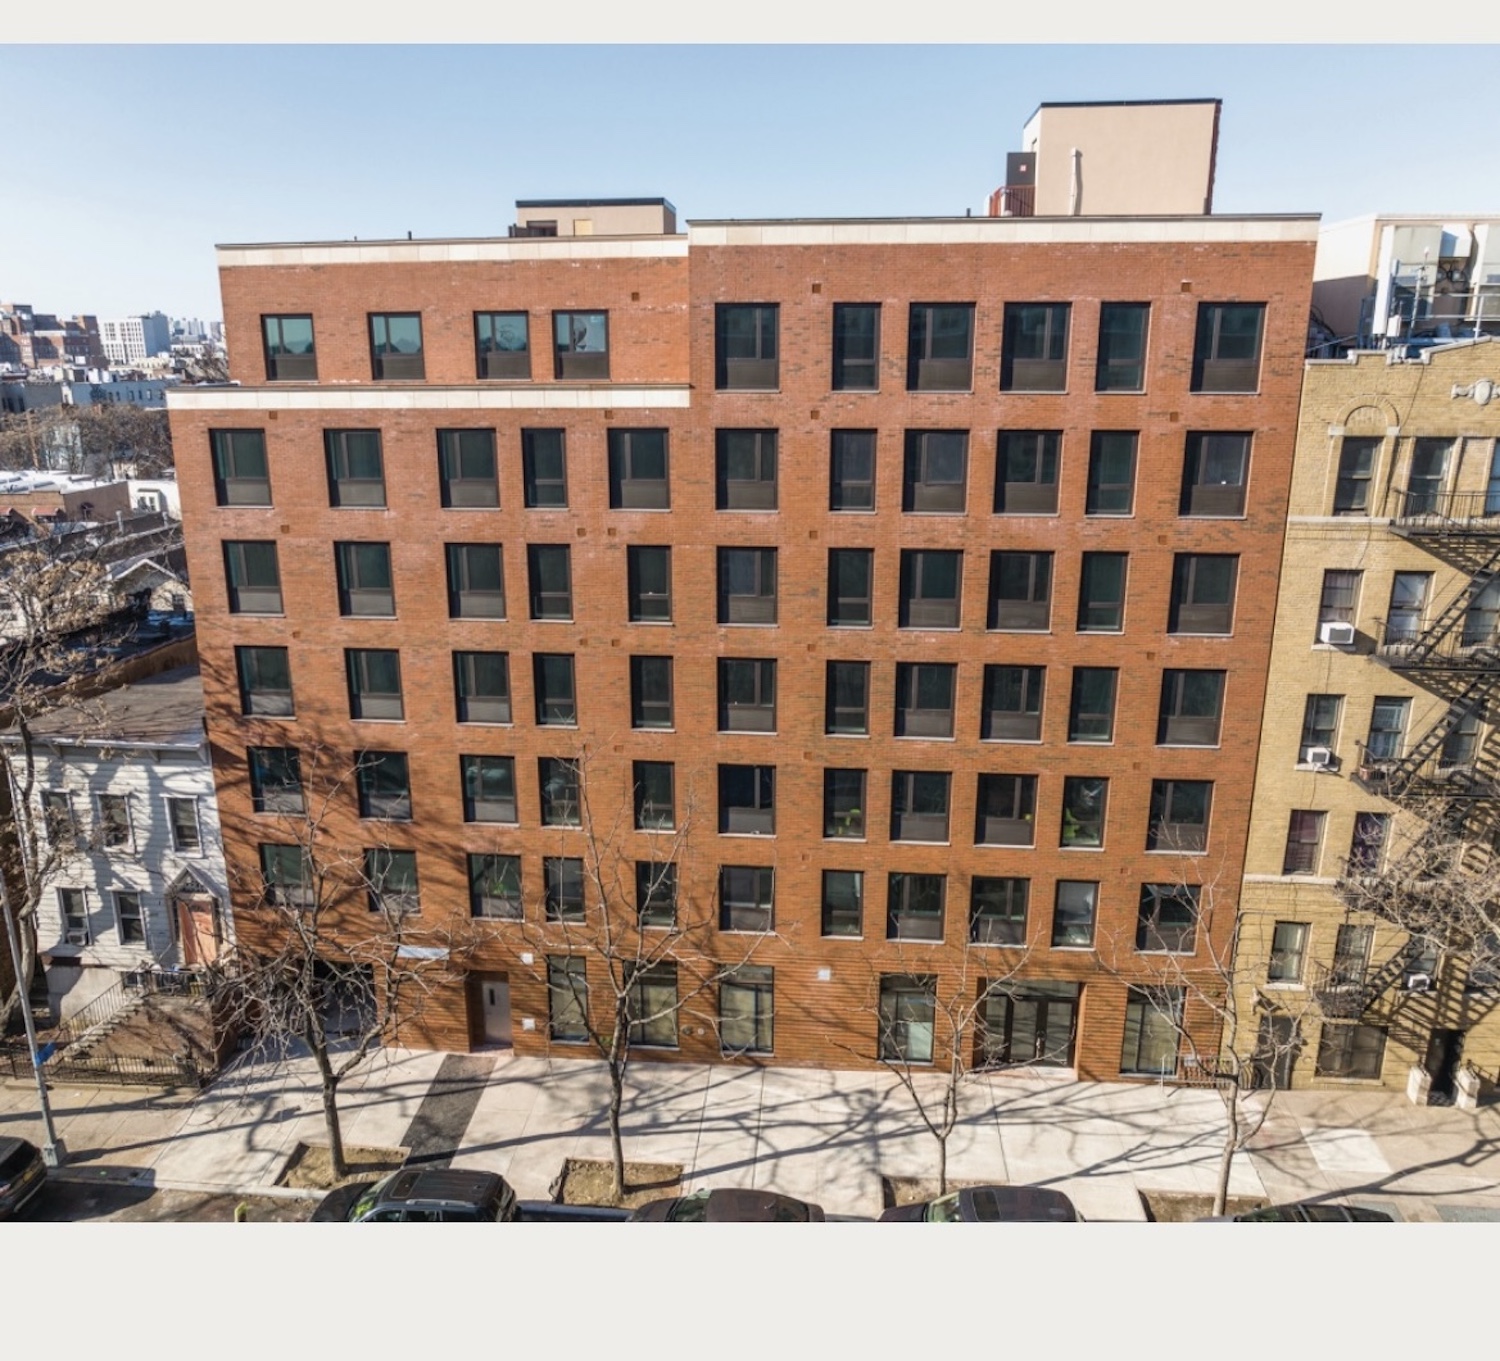 Housing Lottery Launches For 2441 Crotona Avenue In Belmont The Bronx